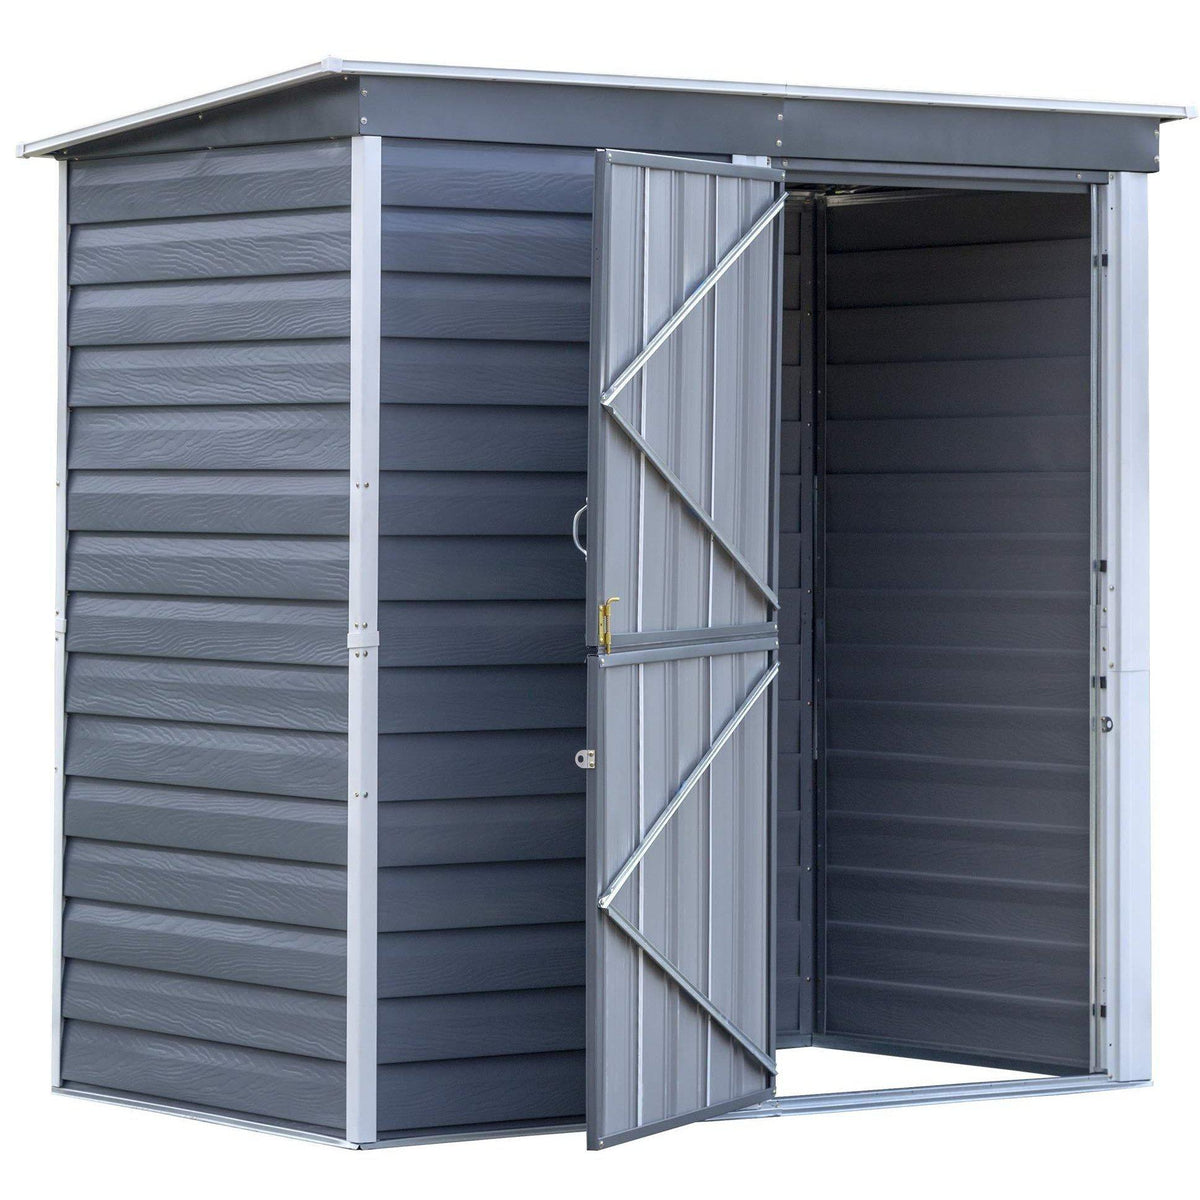 Arrow SBS64 Shed-in-a-Box Compact Galvanized Steel Storage Shed with Pent Roof, 6'x4', Charcoal